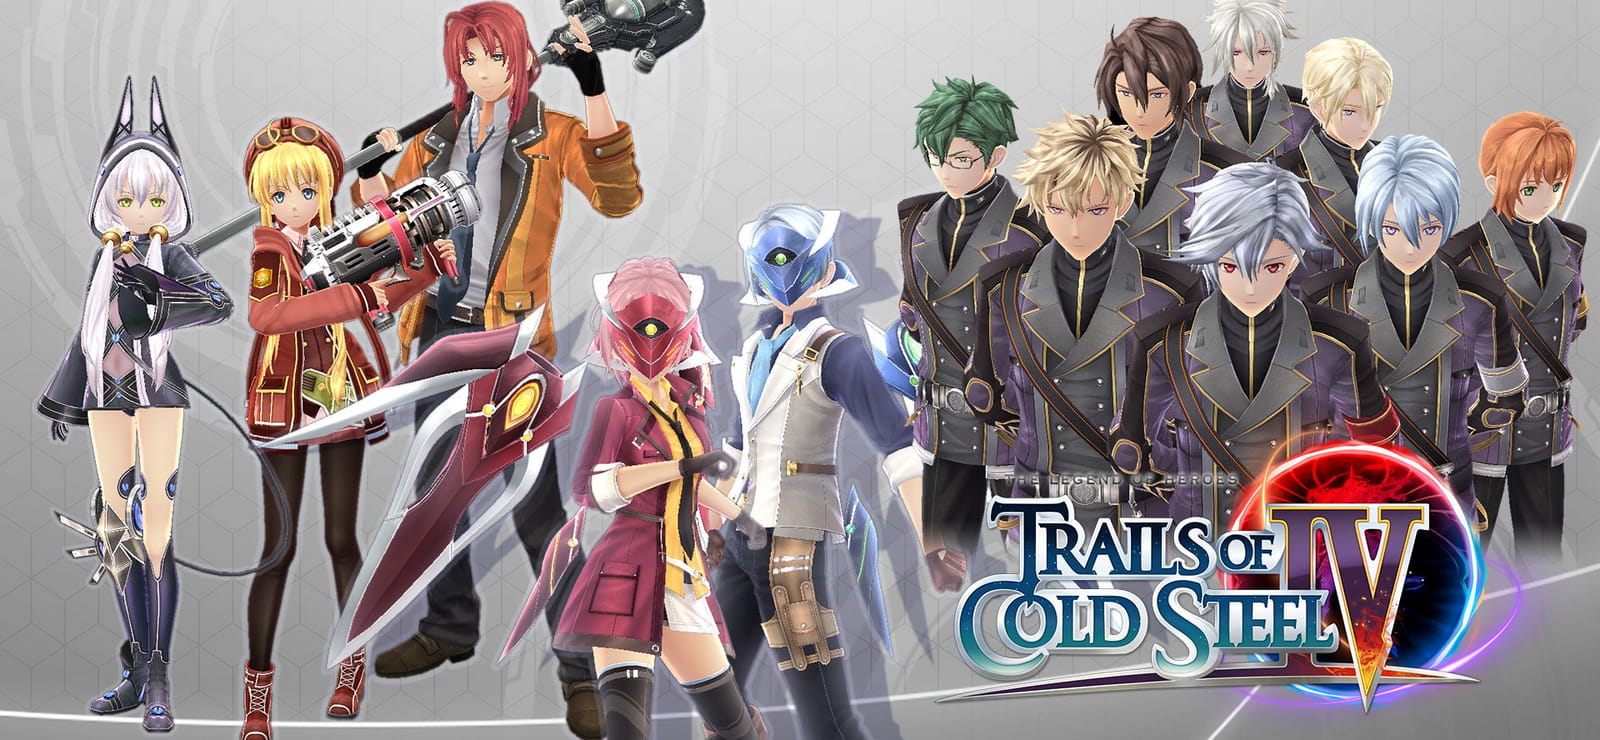 The Legend Of Heroes: Trails Of Cold Steel IV - Standard Cosmetic Set